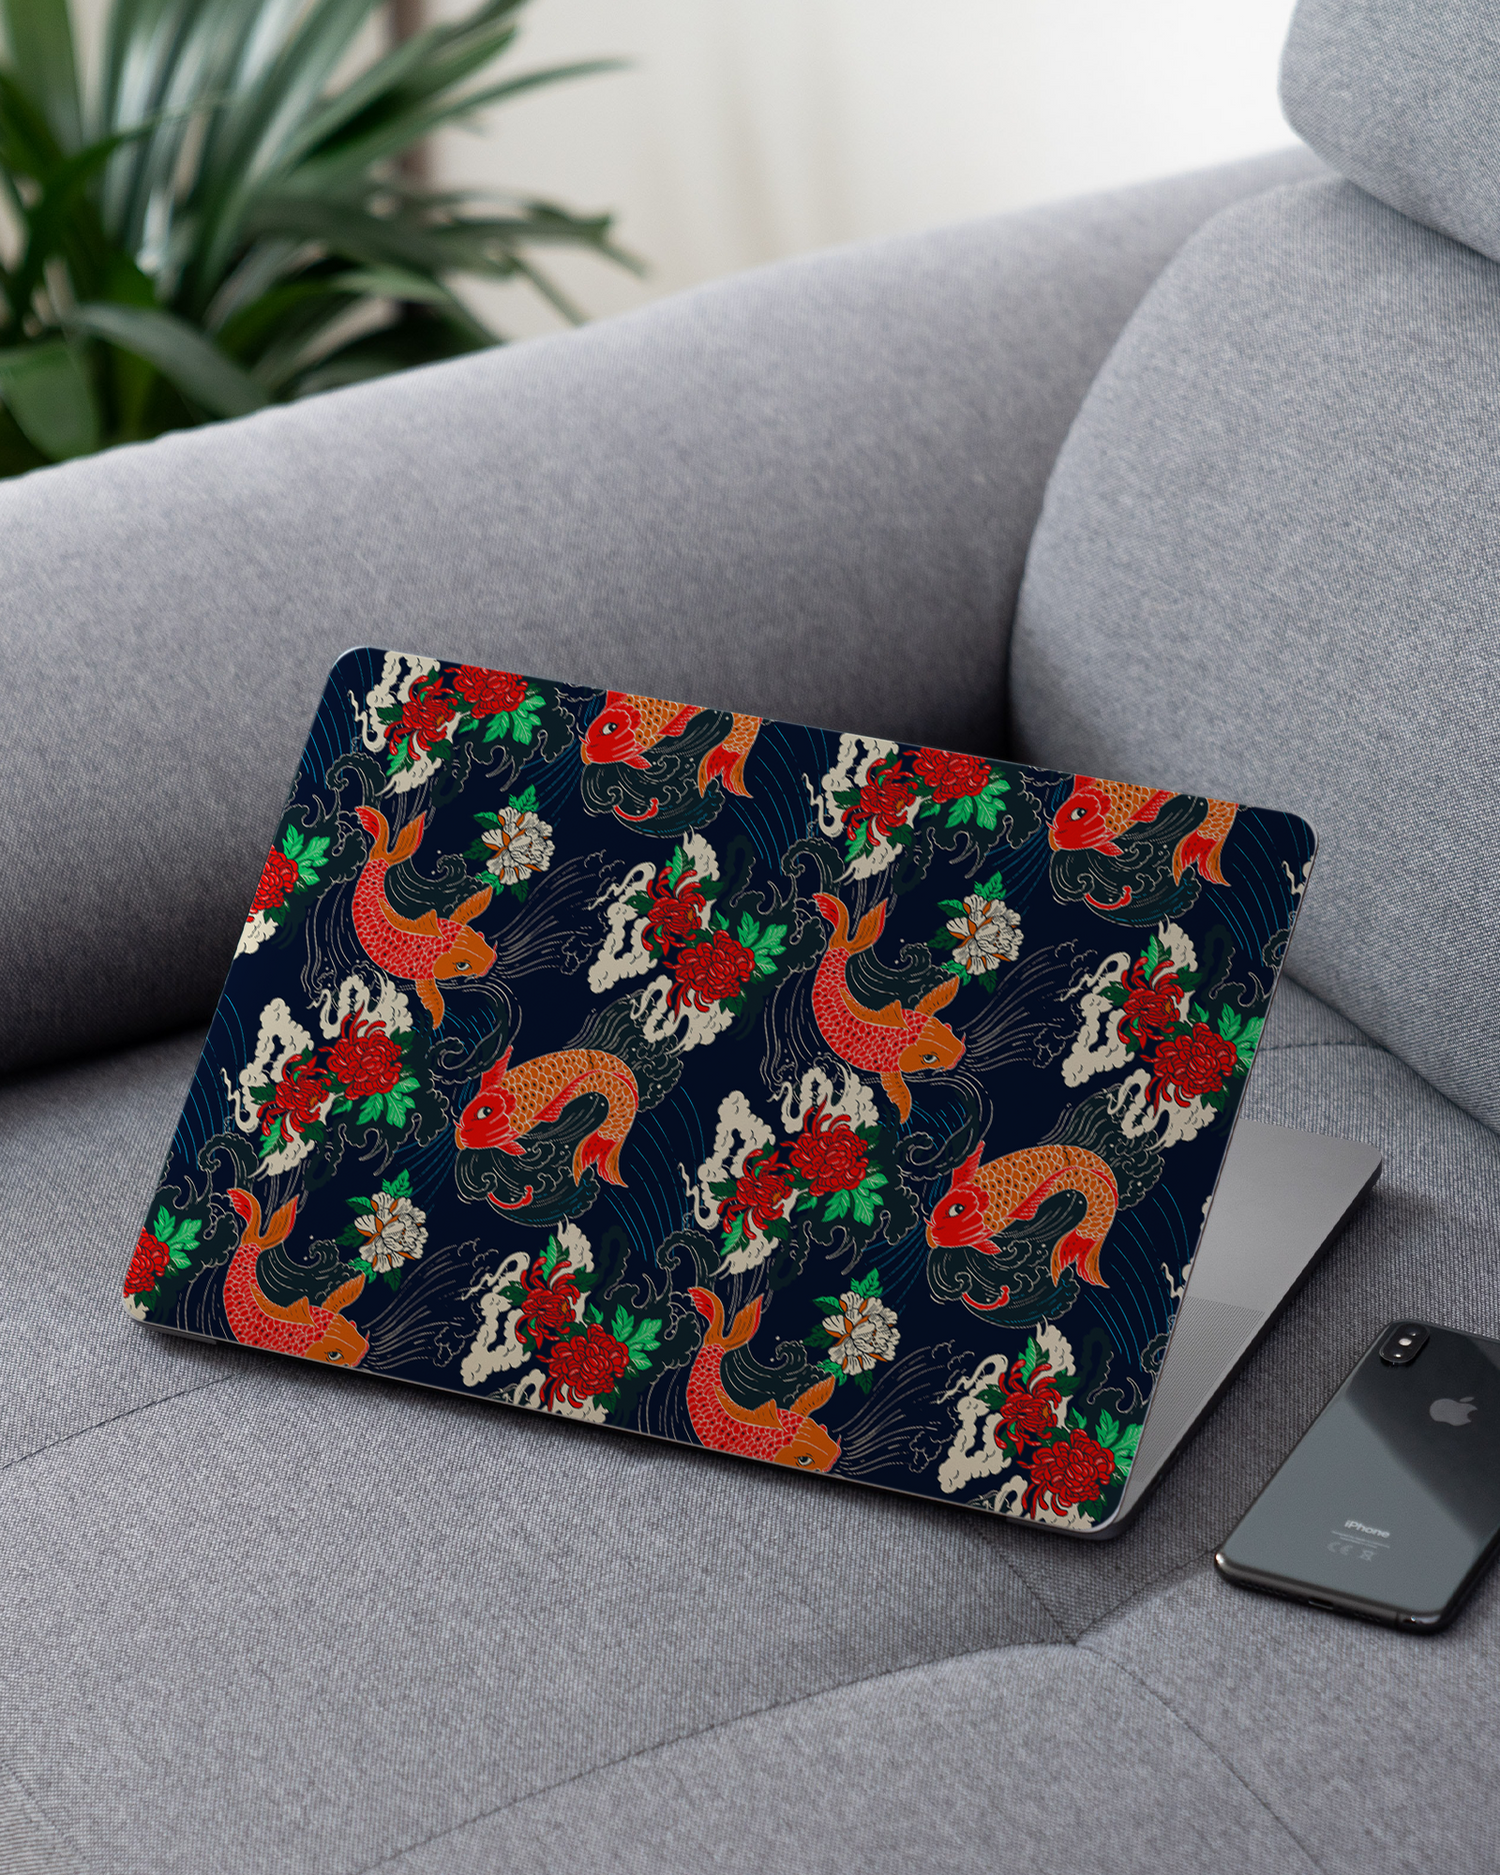 Repeating Koi Laptop Skin for 13 inch Apple MacBooks on a couch